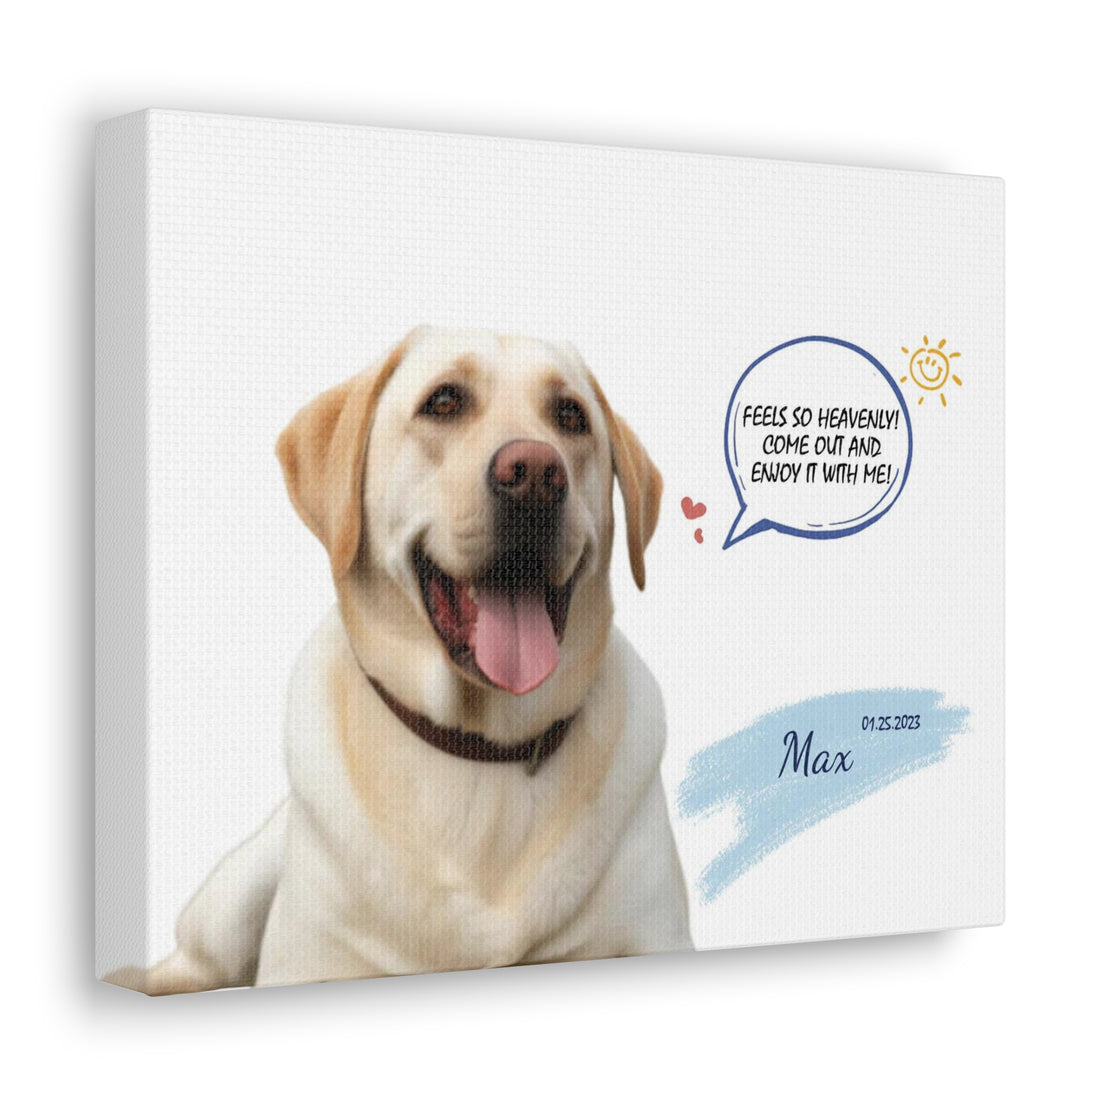 Dog with Sunshine - Personalized Pet Portrait Gifts Canvas Prints